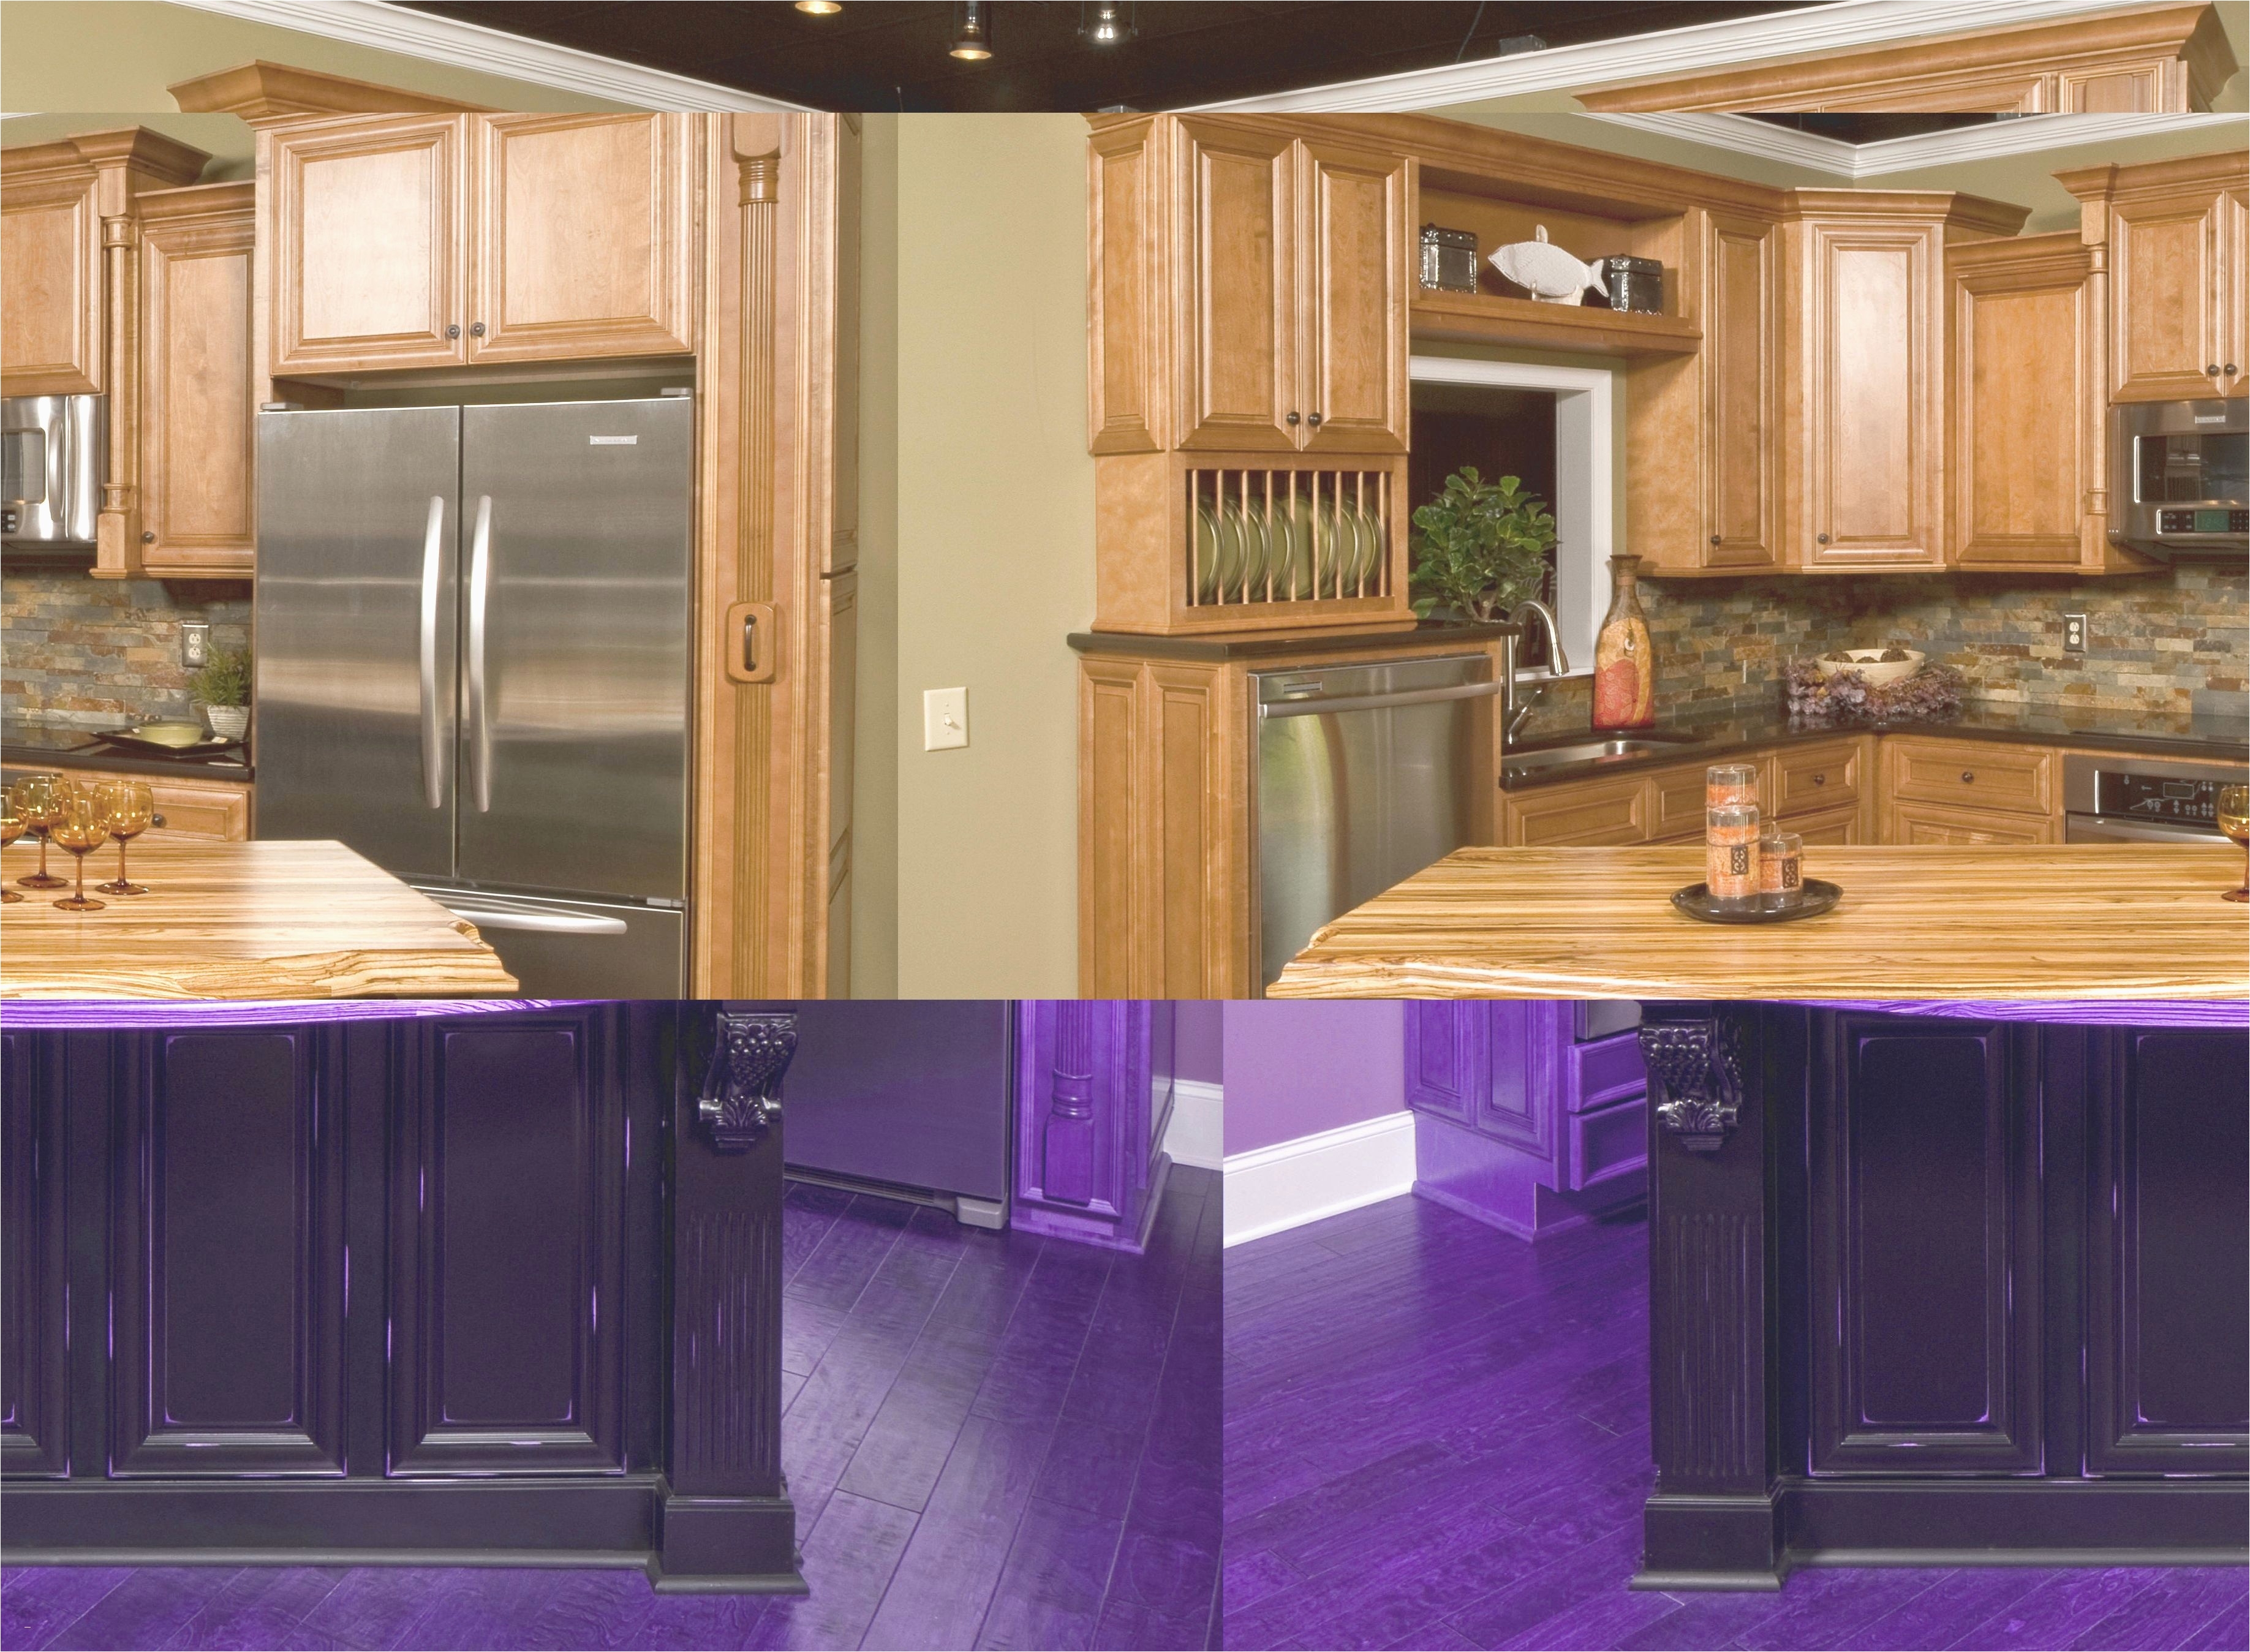 Exquisite Kitchen Pantry Furniture Within Assembled Kitchen Cabinets The Most Wainscoting Cabinets 0d Home